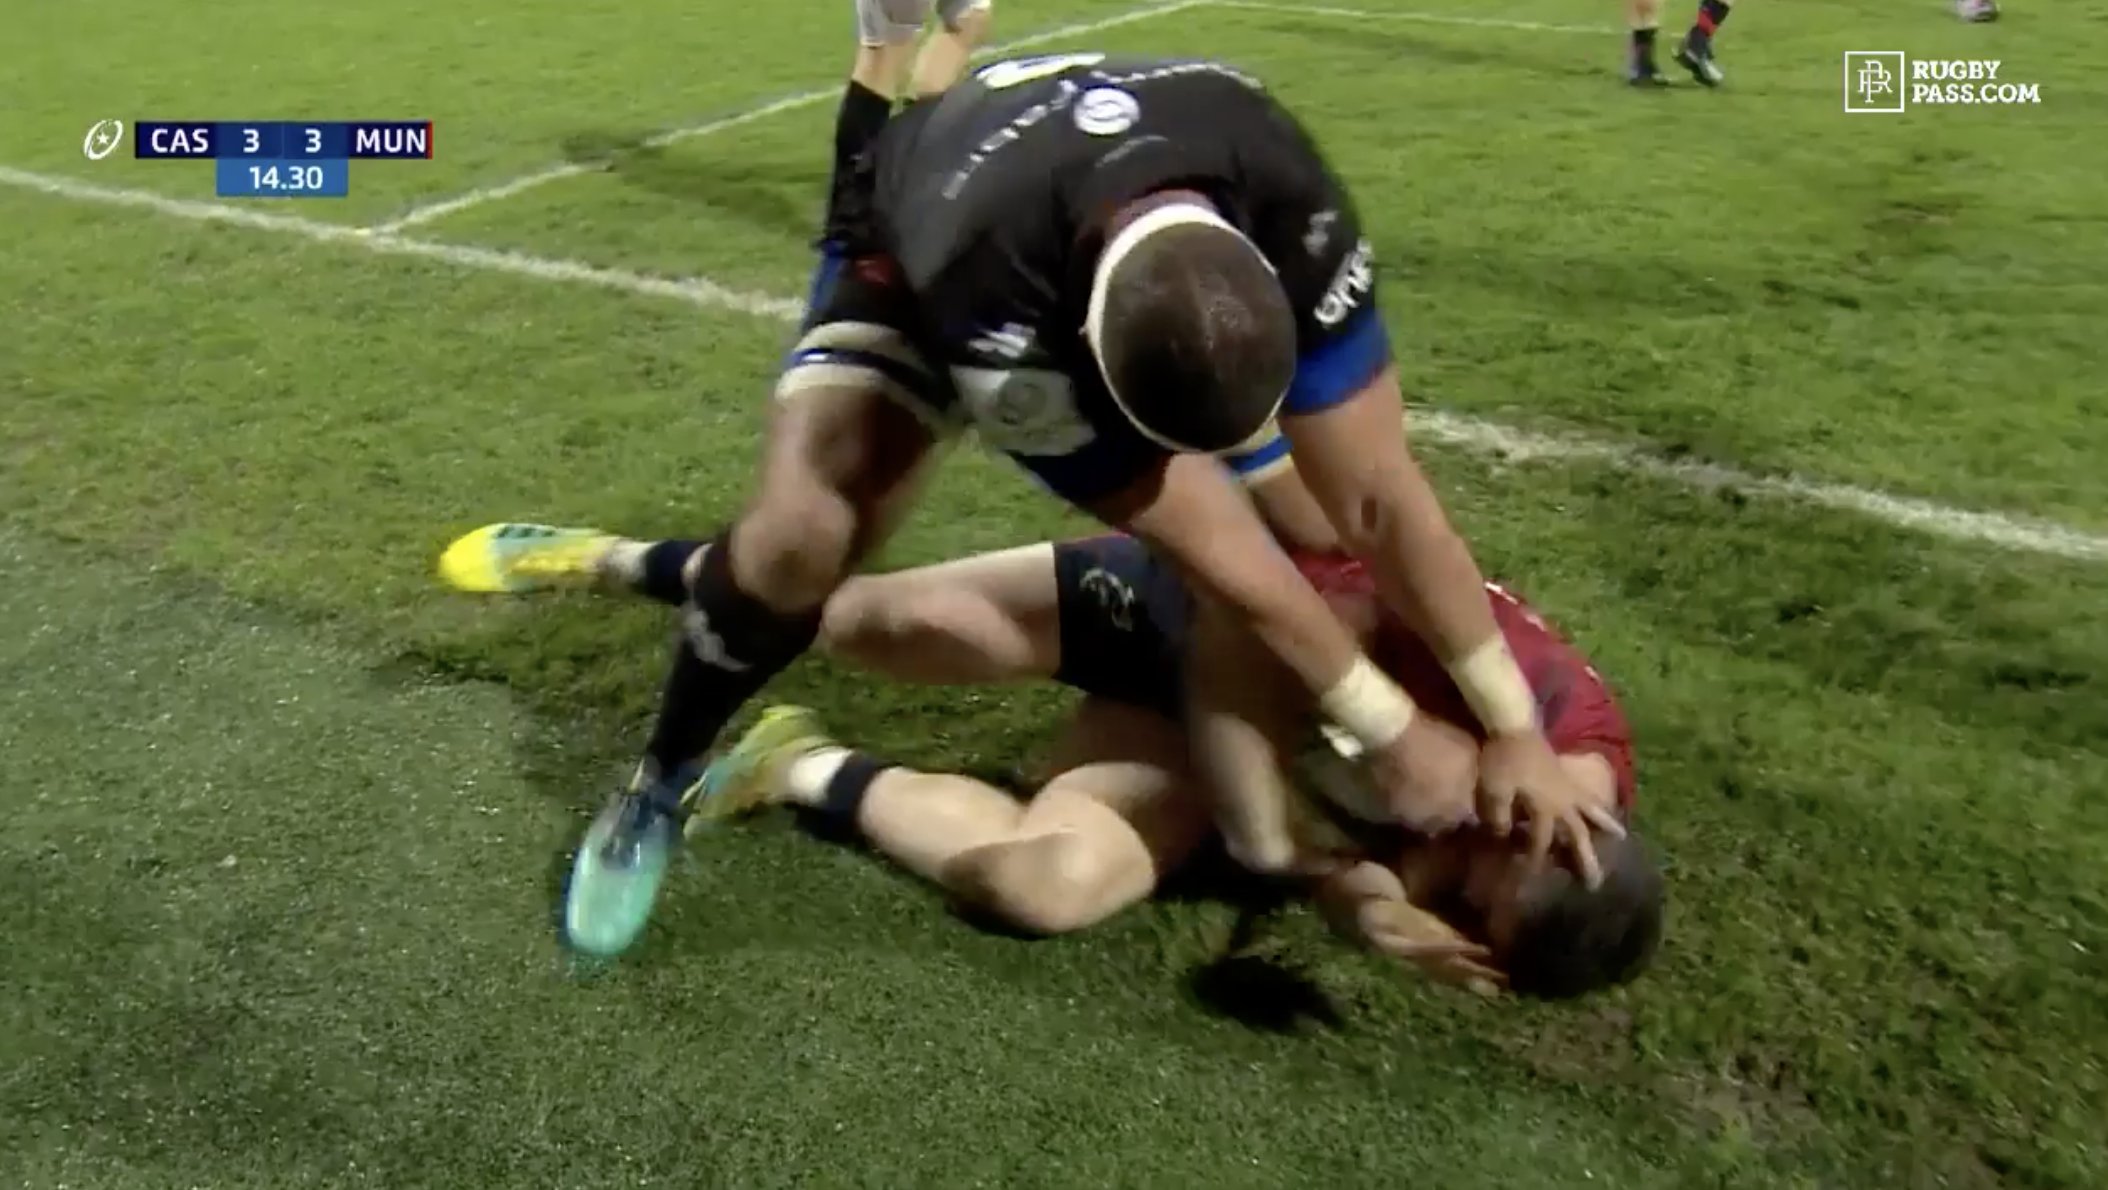 WATCH: Social media in uproar after Castres reach unfound levels of thuggery against Munster